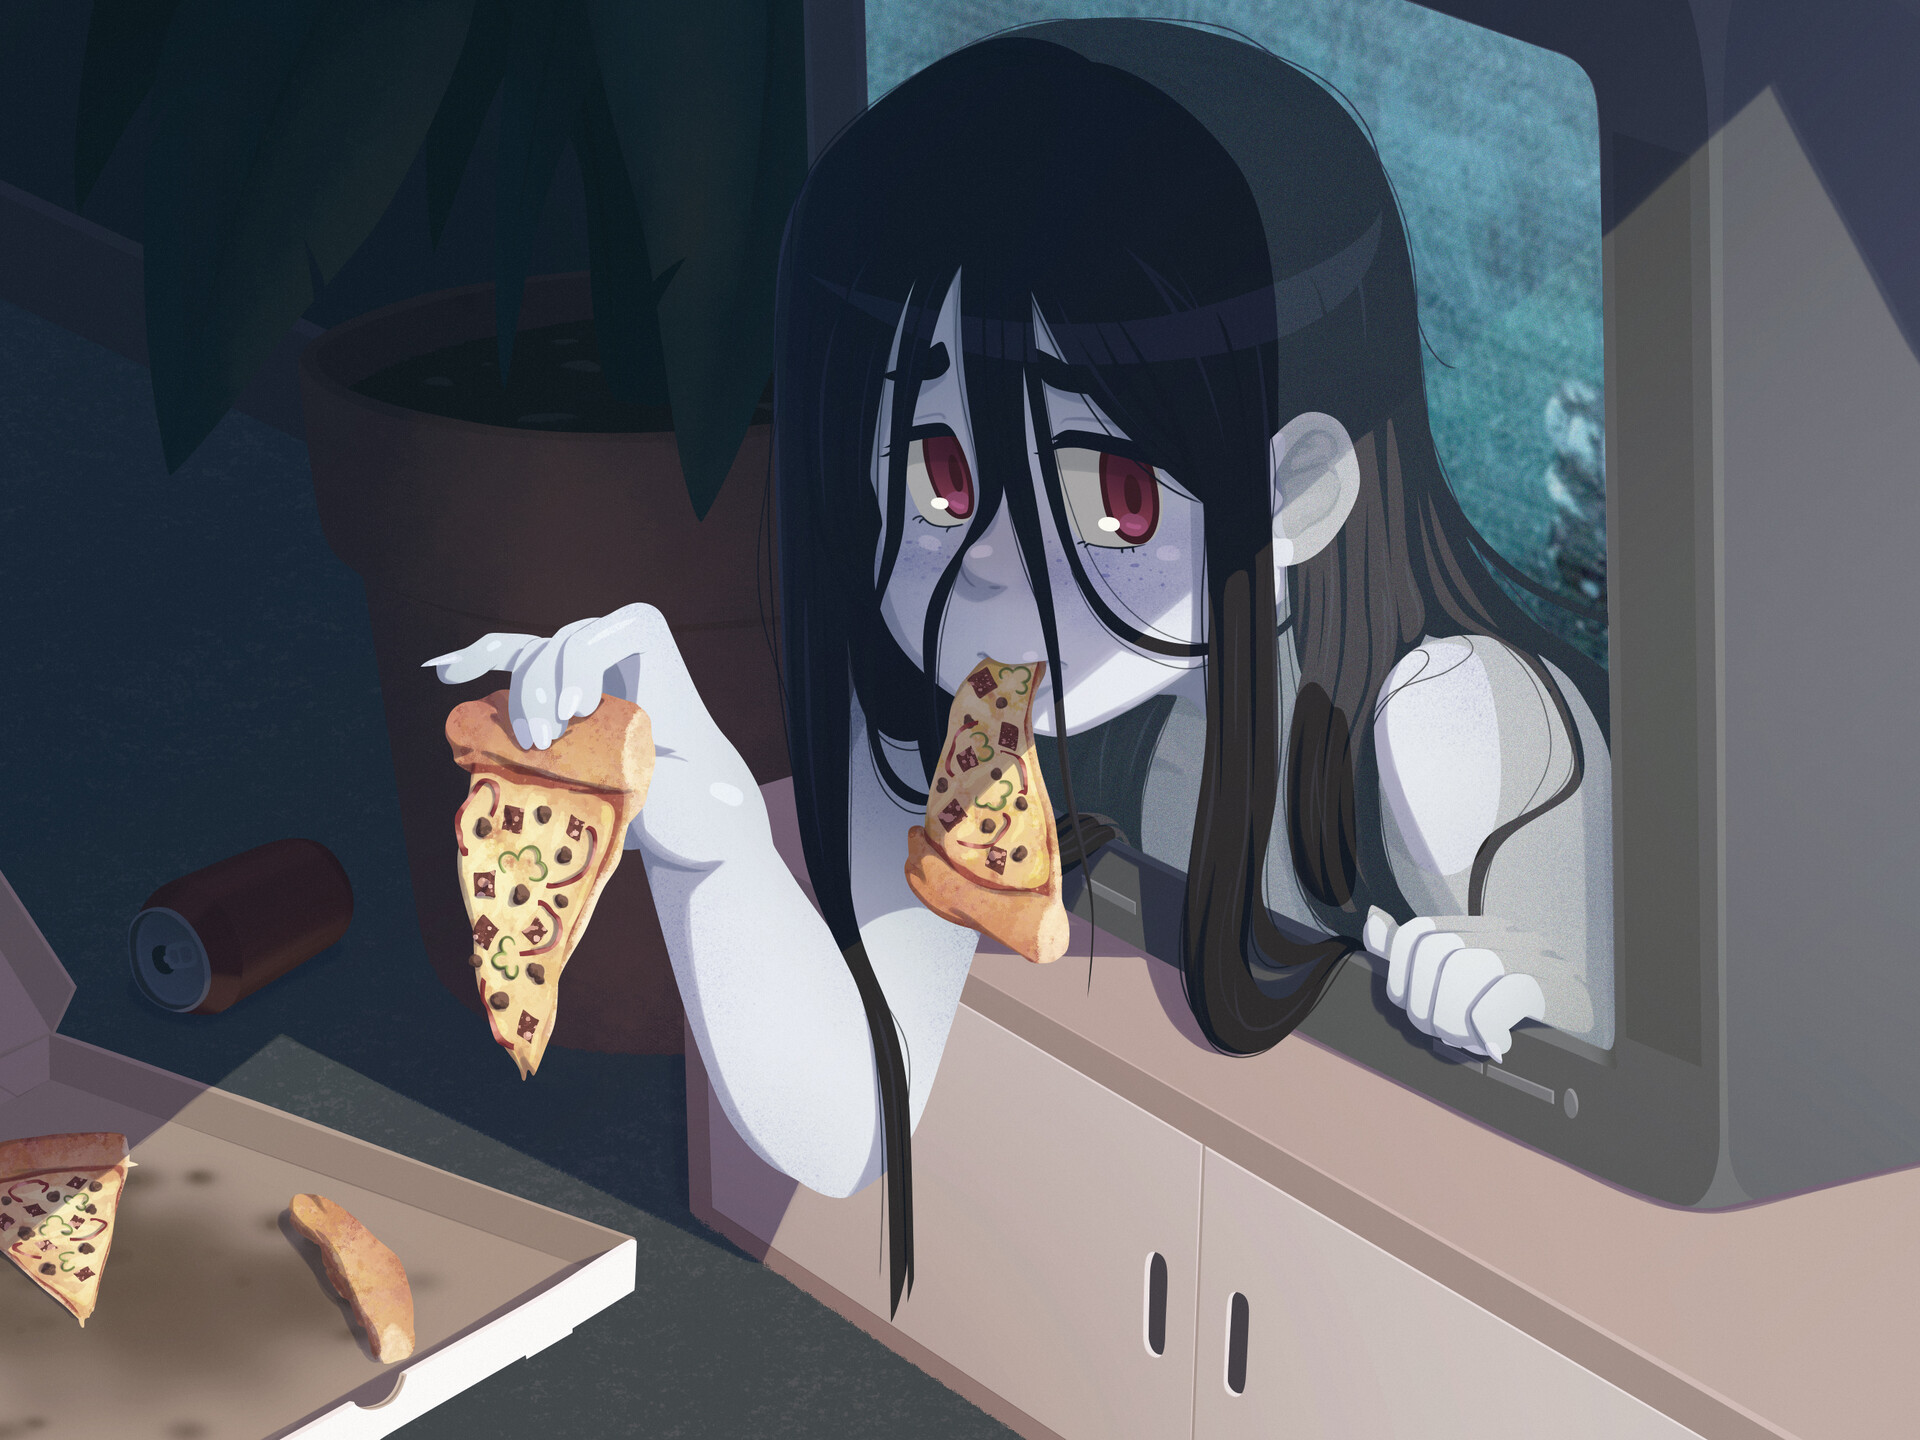 Can Sadako have some of your left over pizza? 